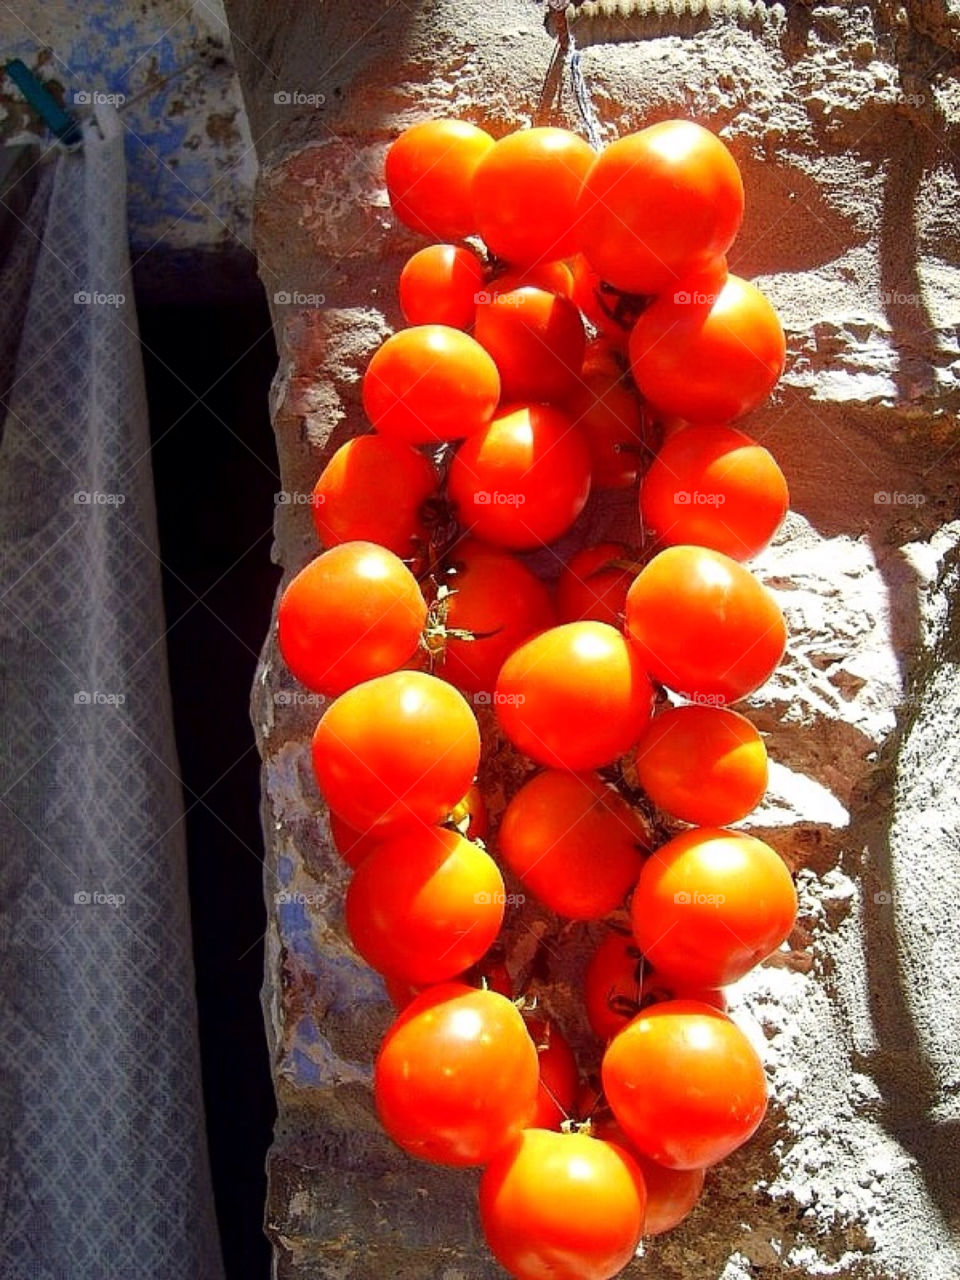 travel house tomatoes greece by merethe